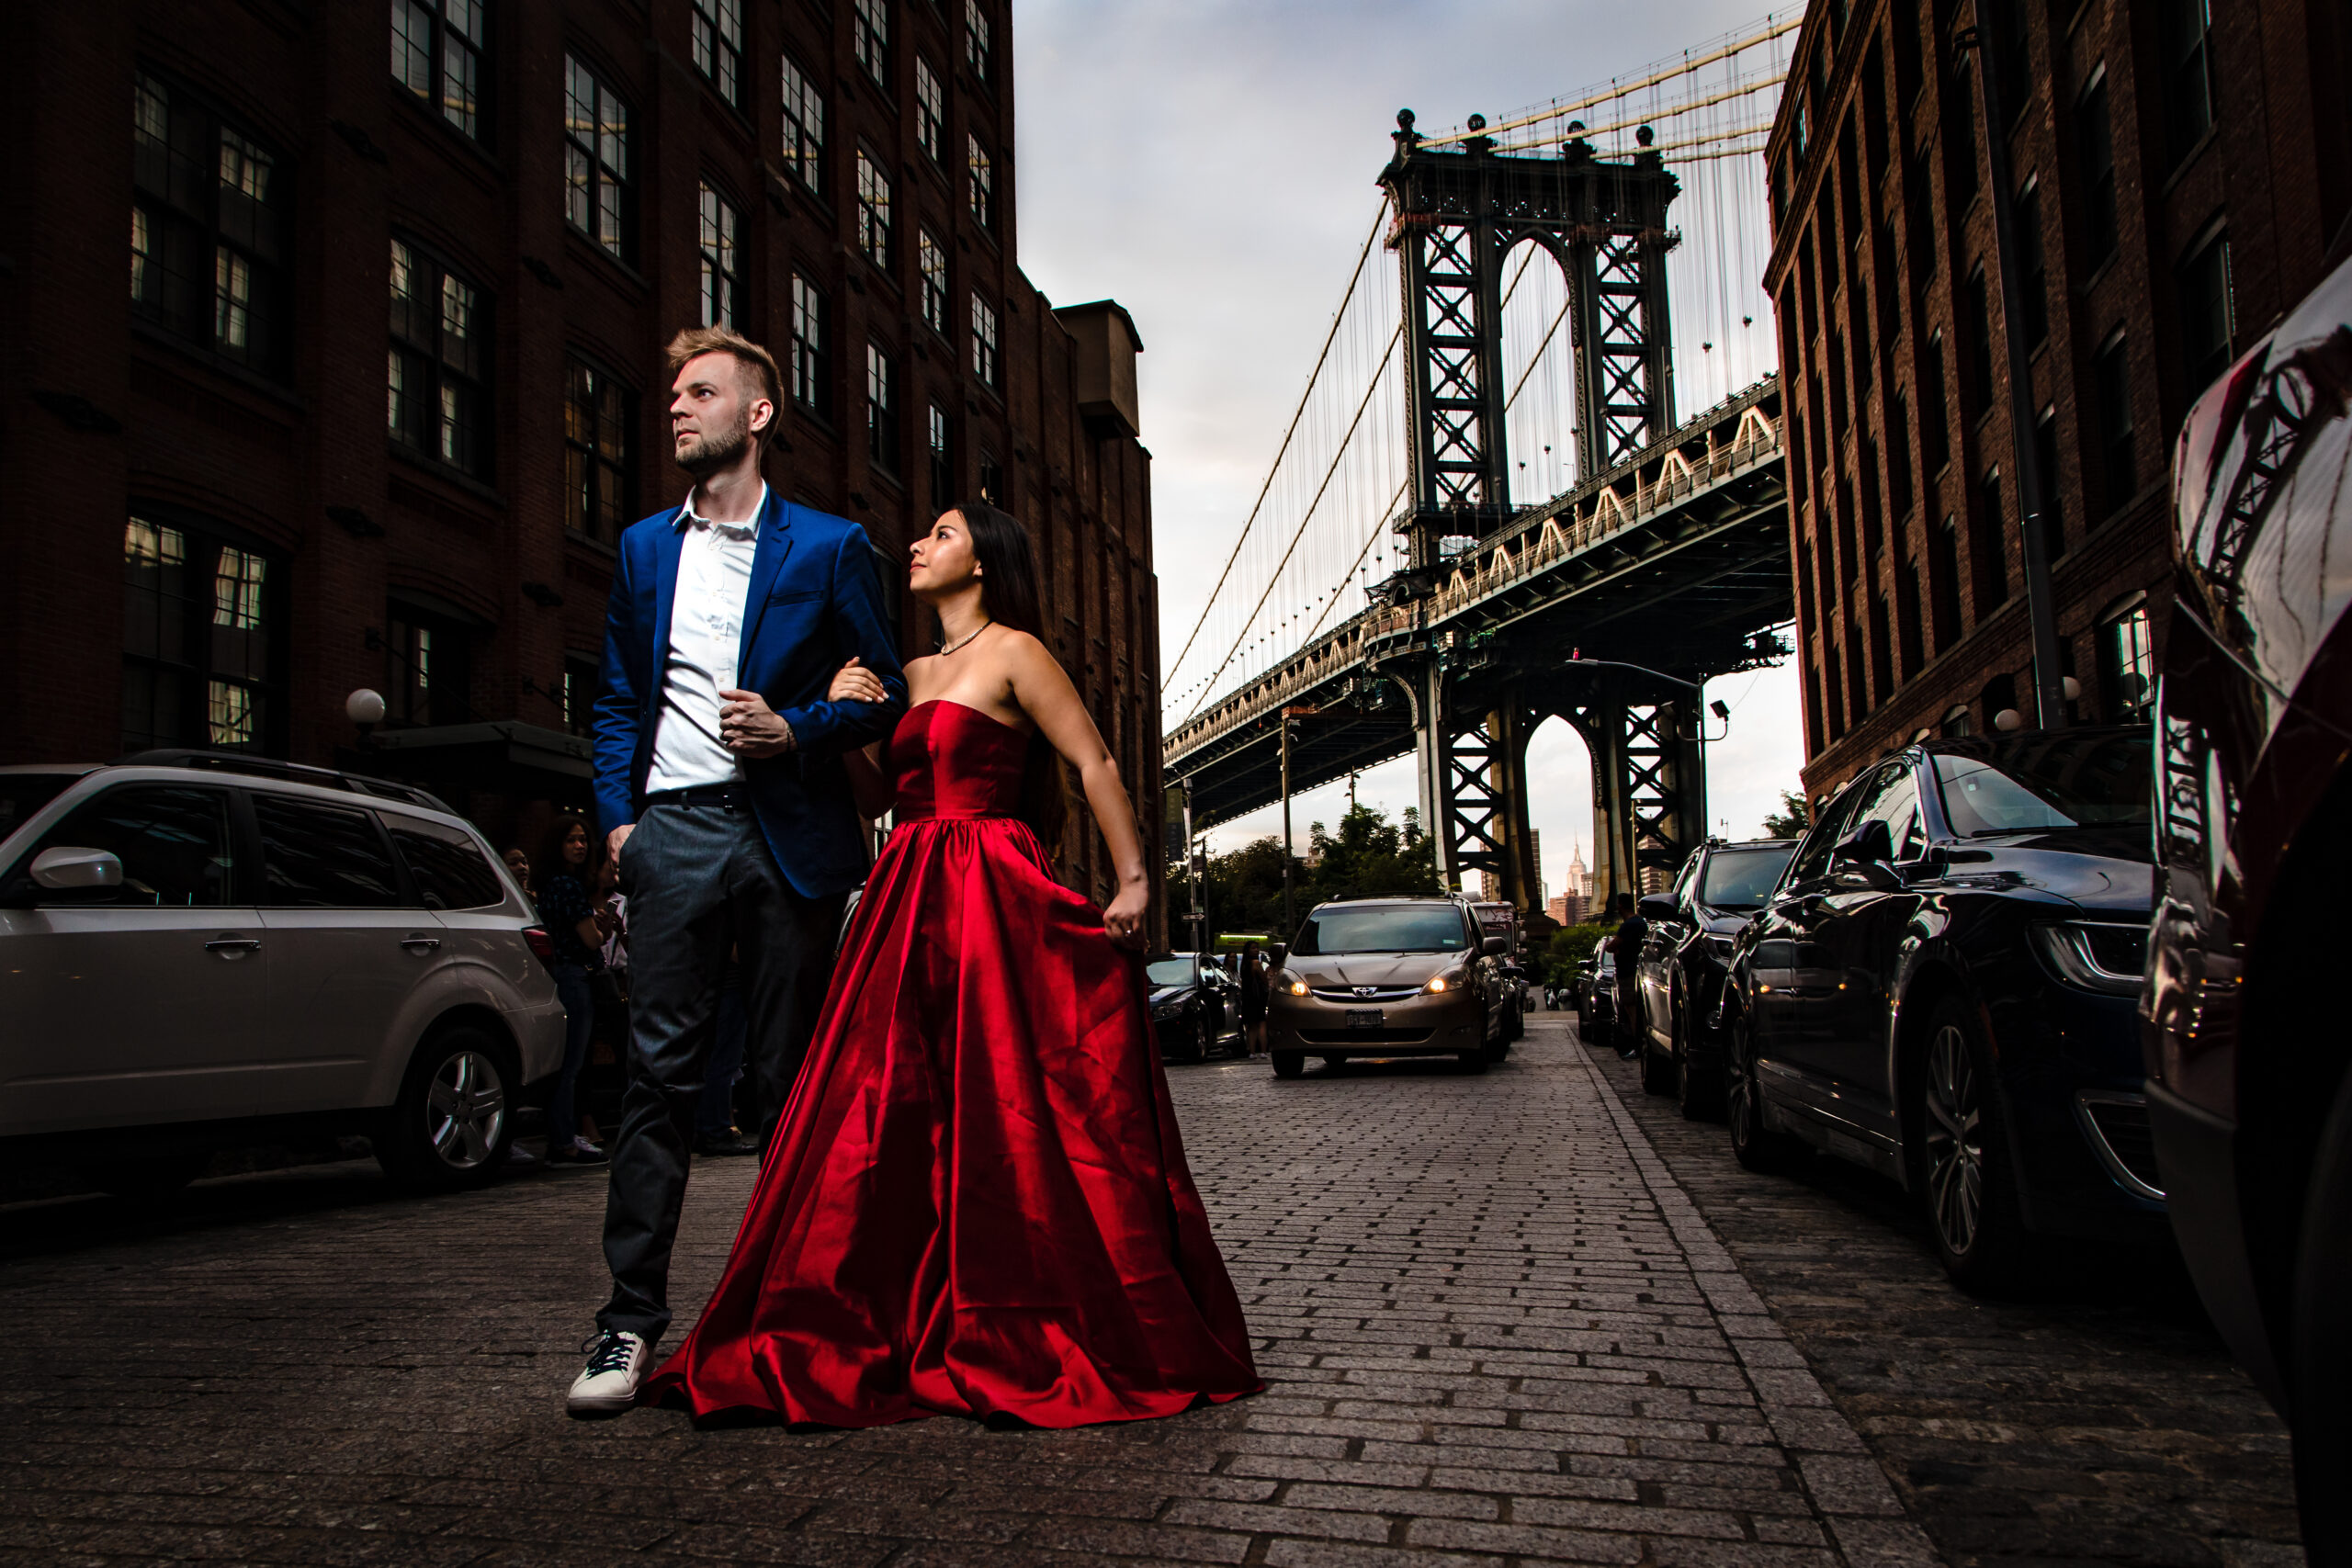 A creatively framed engagement session image of a couple on Washington Street in Brooklyn, with the iconic Manhattan Bridge providing a majestic backdrop. This picturesque scene was expertly captured by North Jersey wedding photographer Jarot Bocanegra